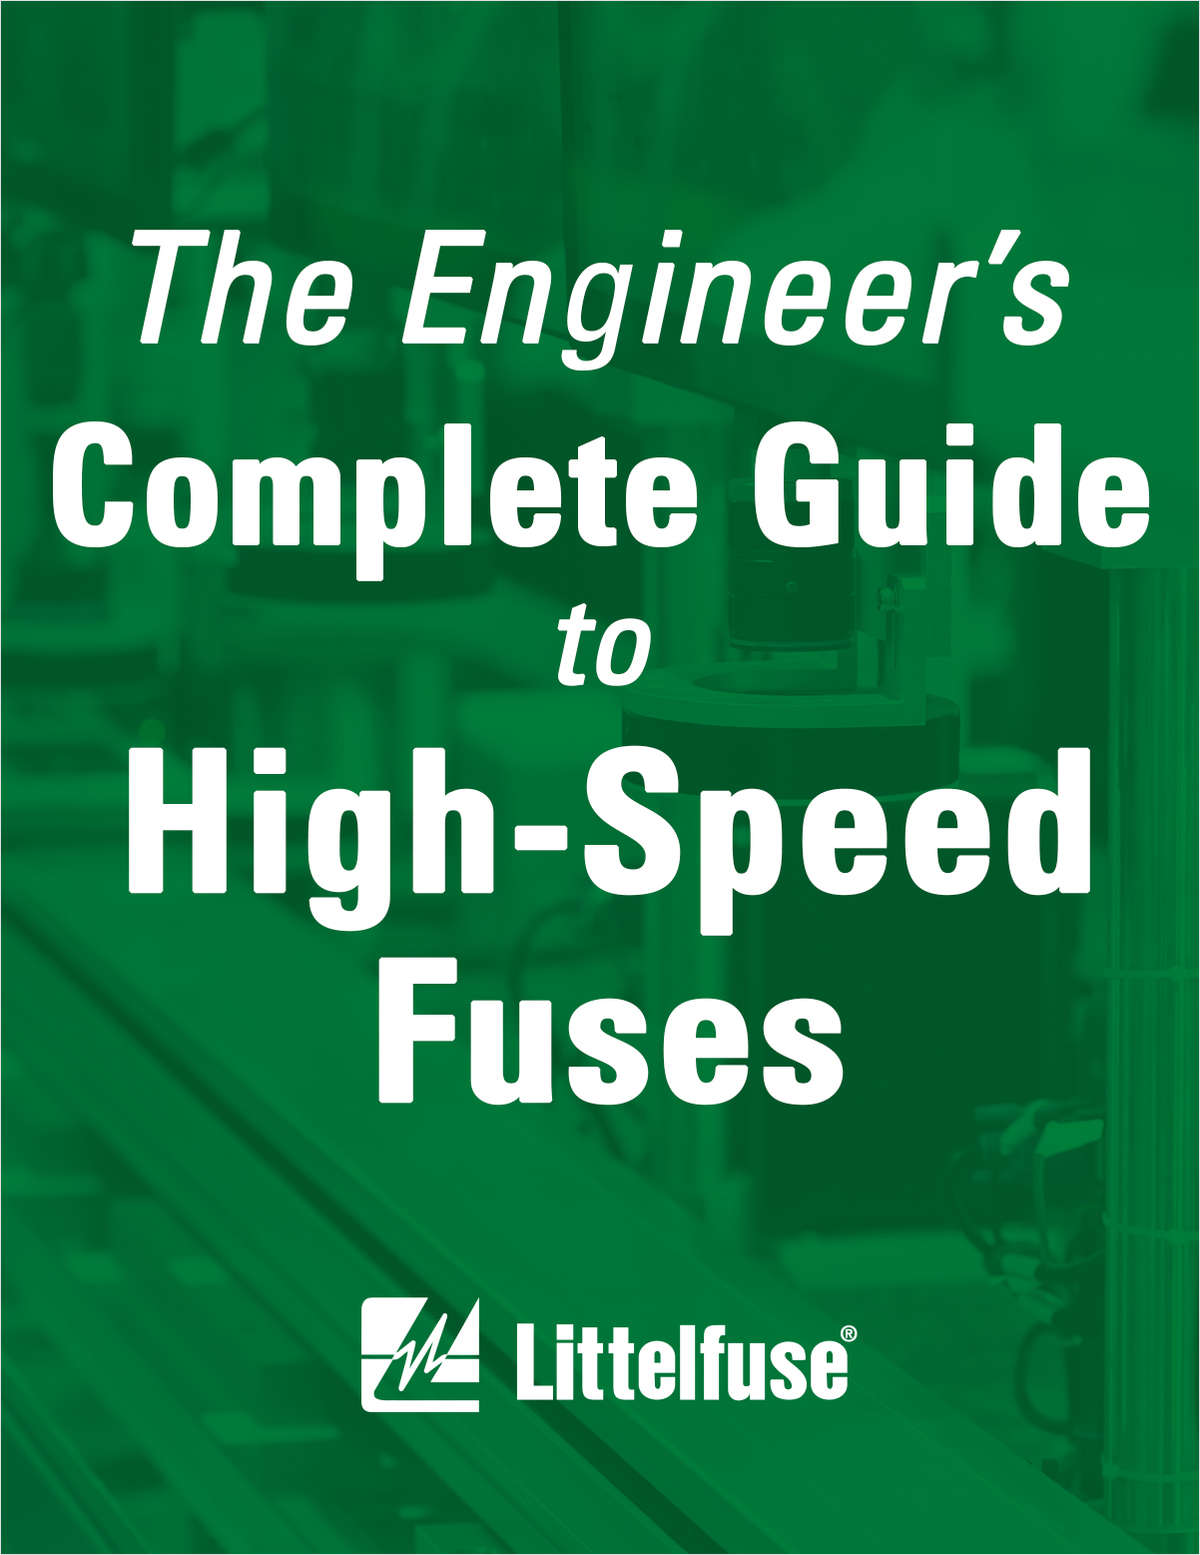 The Engineer's Complete Guide to High-Speed Fuses